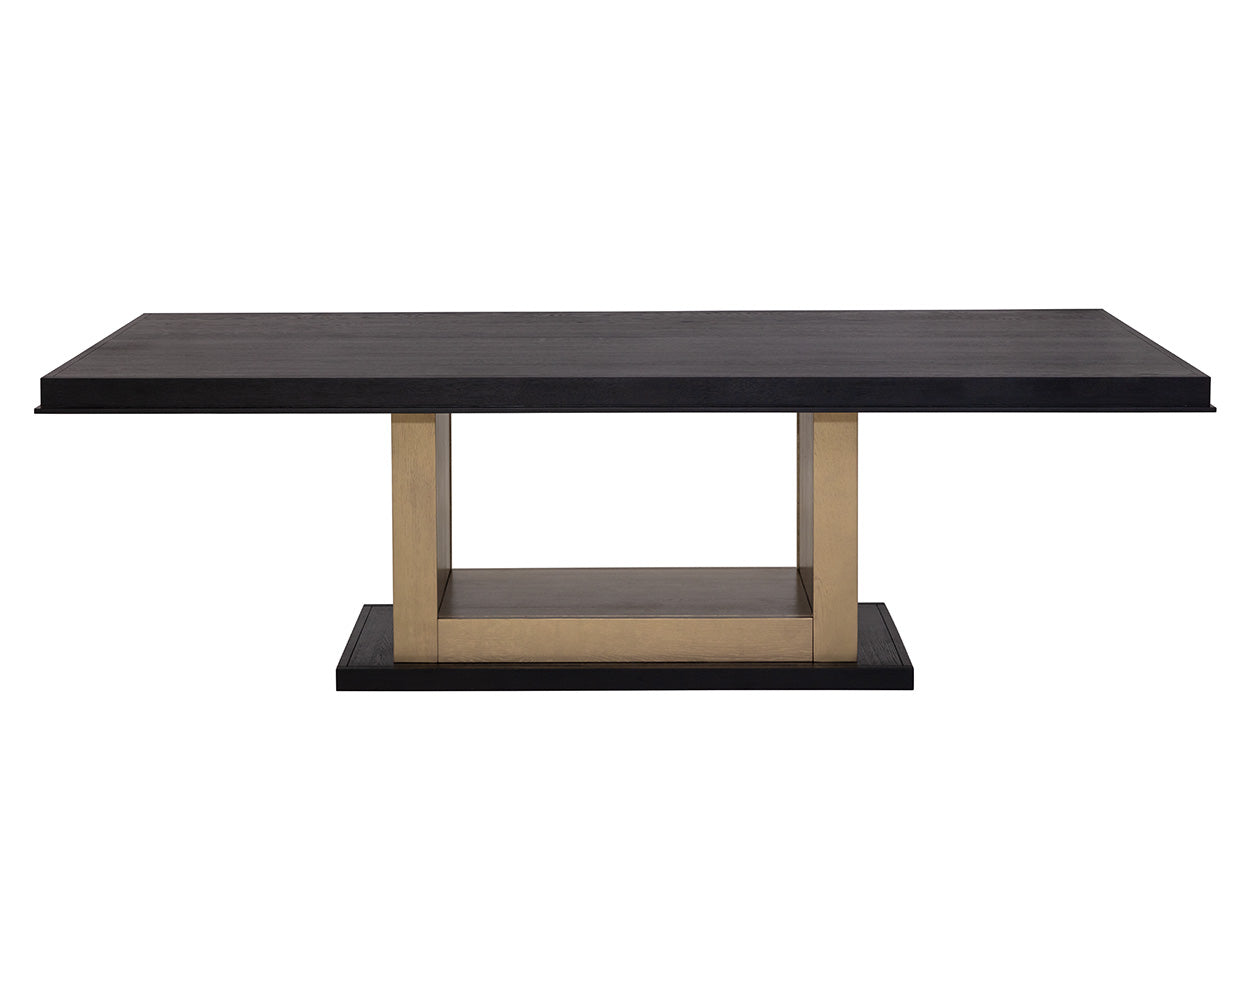 Judson Dining Table